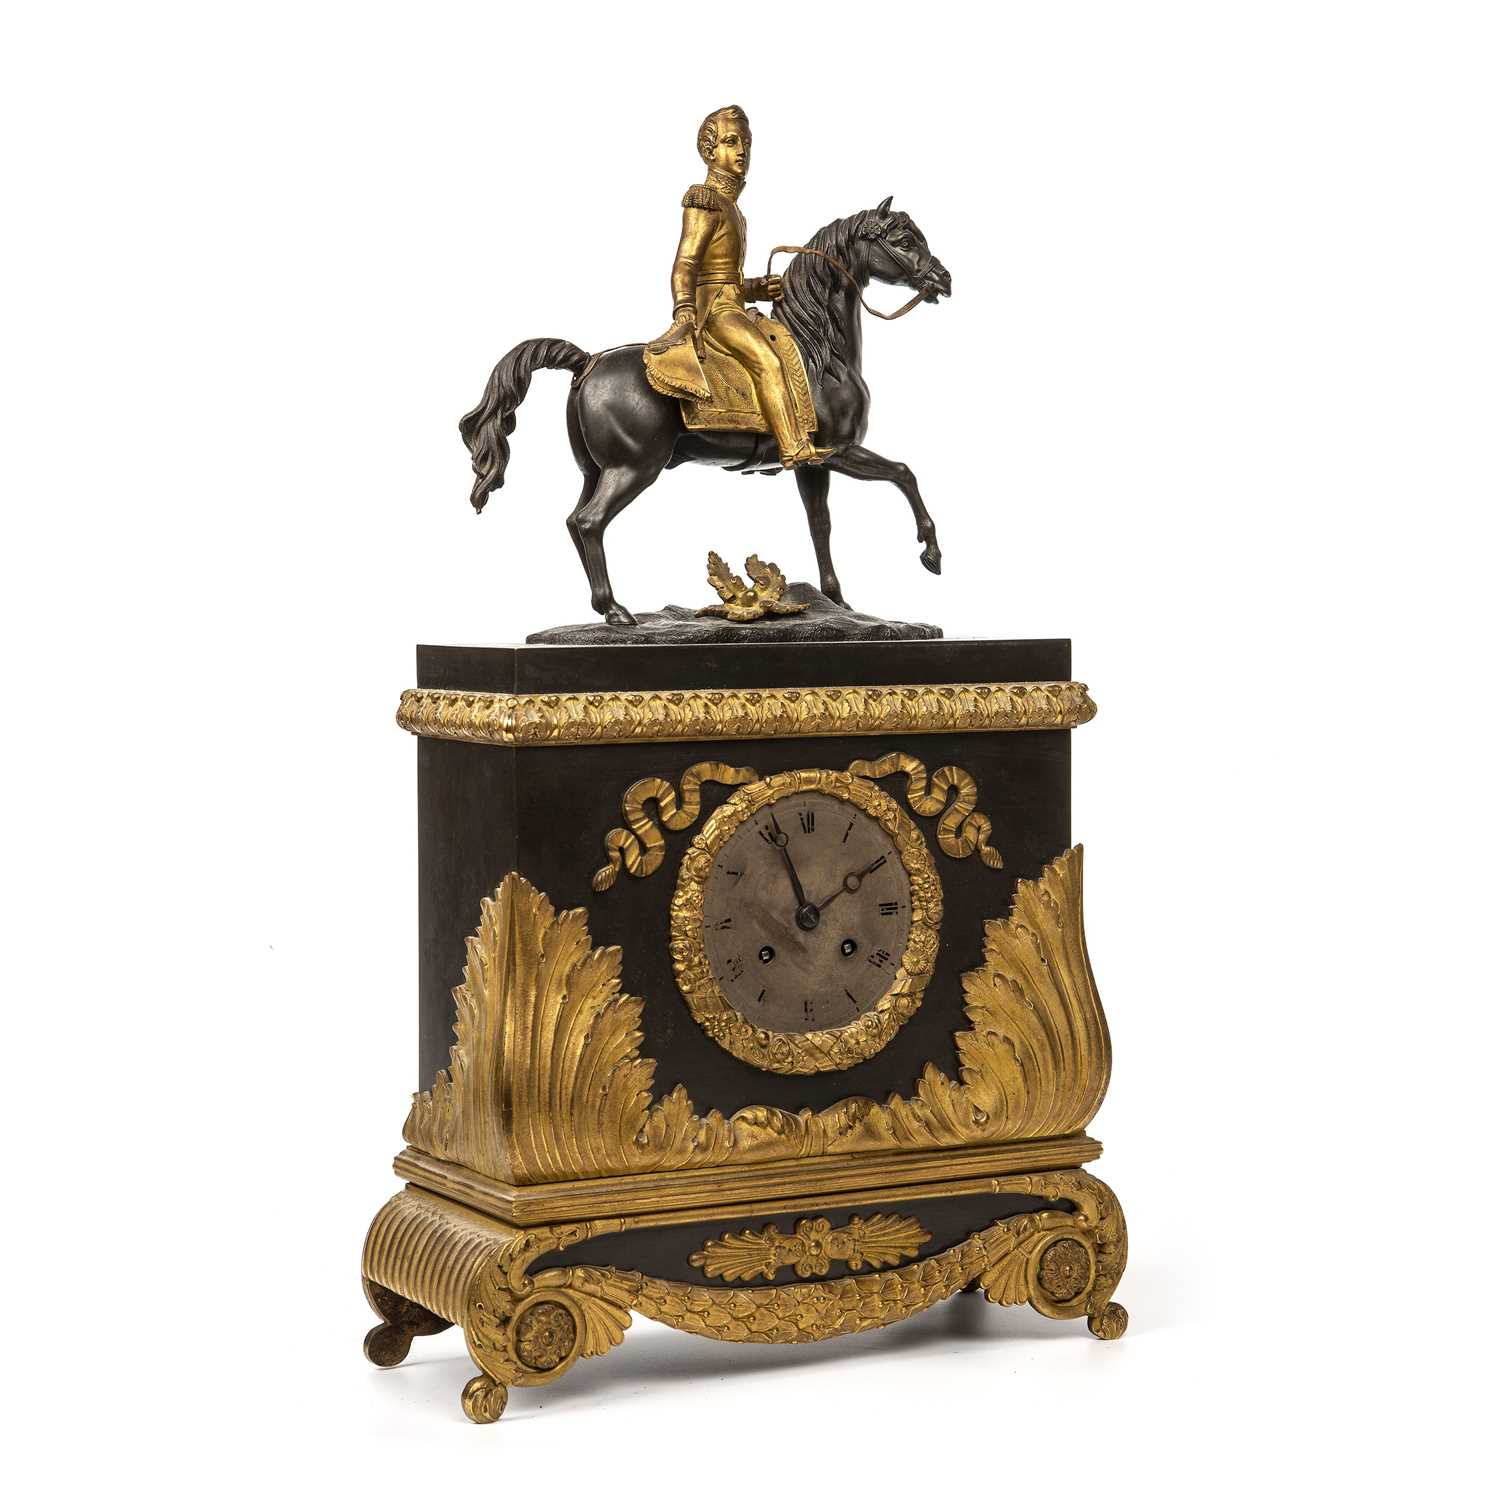 A 19th century French mantel clock with silvered Roman dial, drum movement with silk suspension - Image 2 of 4